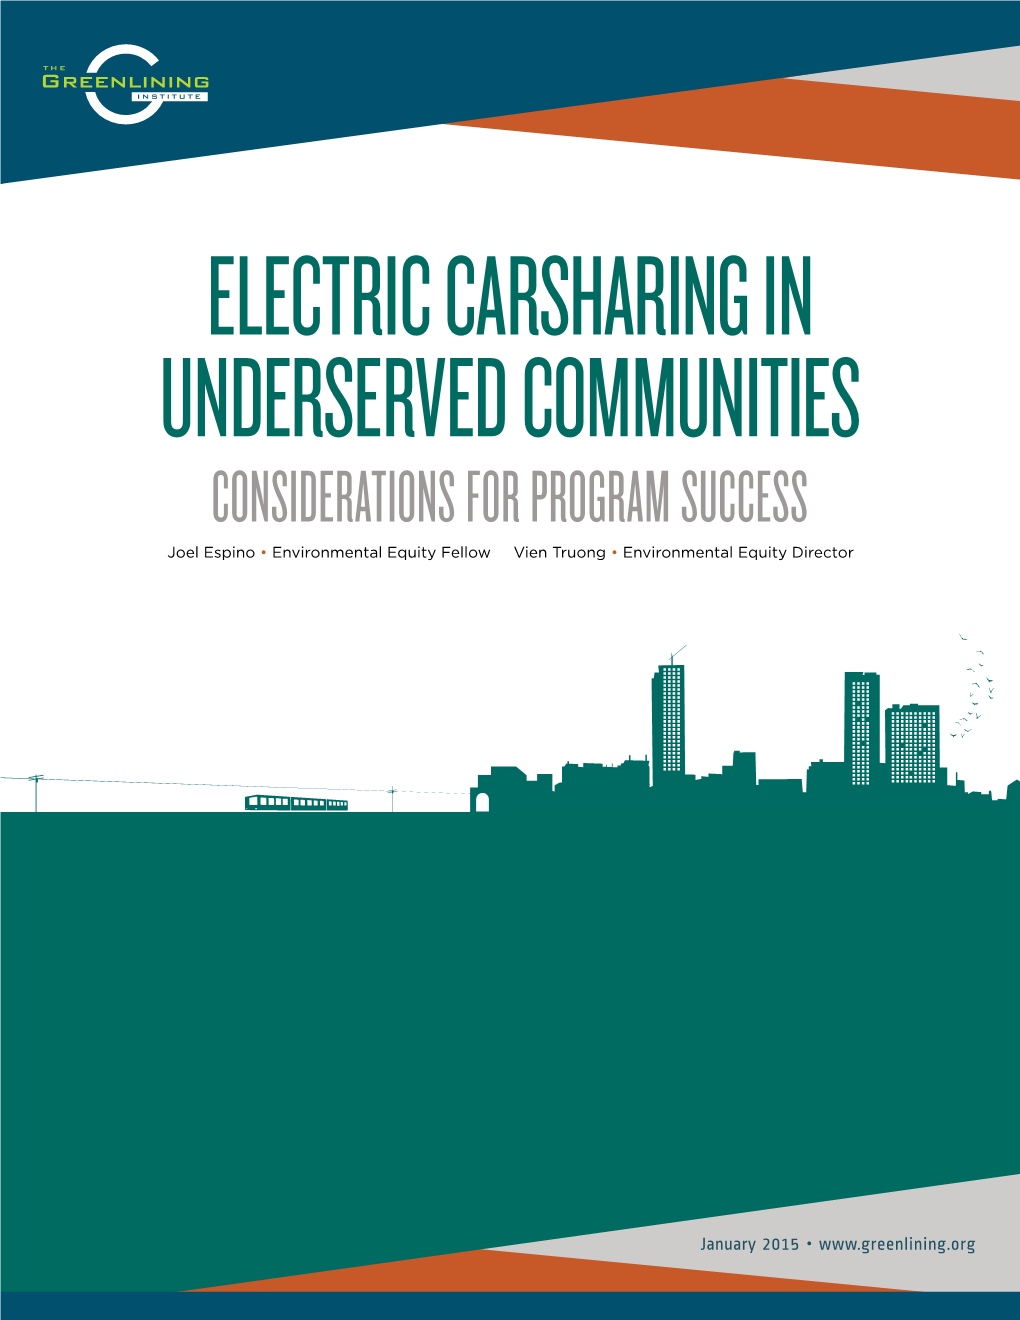 Electric Carsharing in Underserved Communities